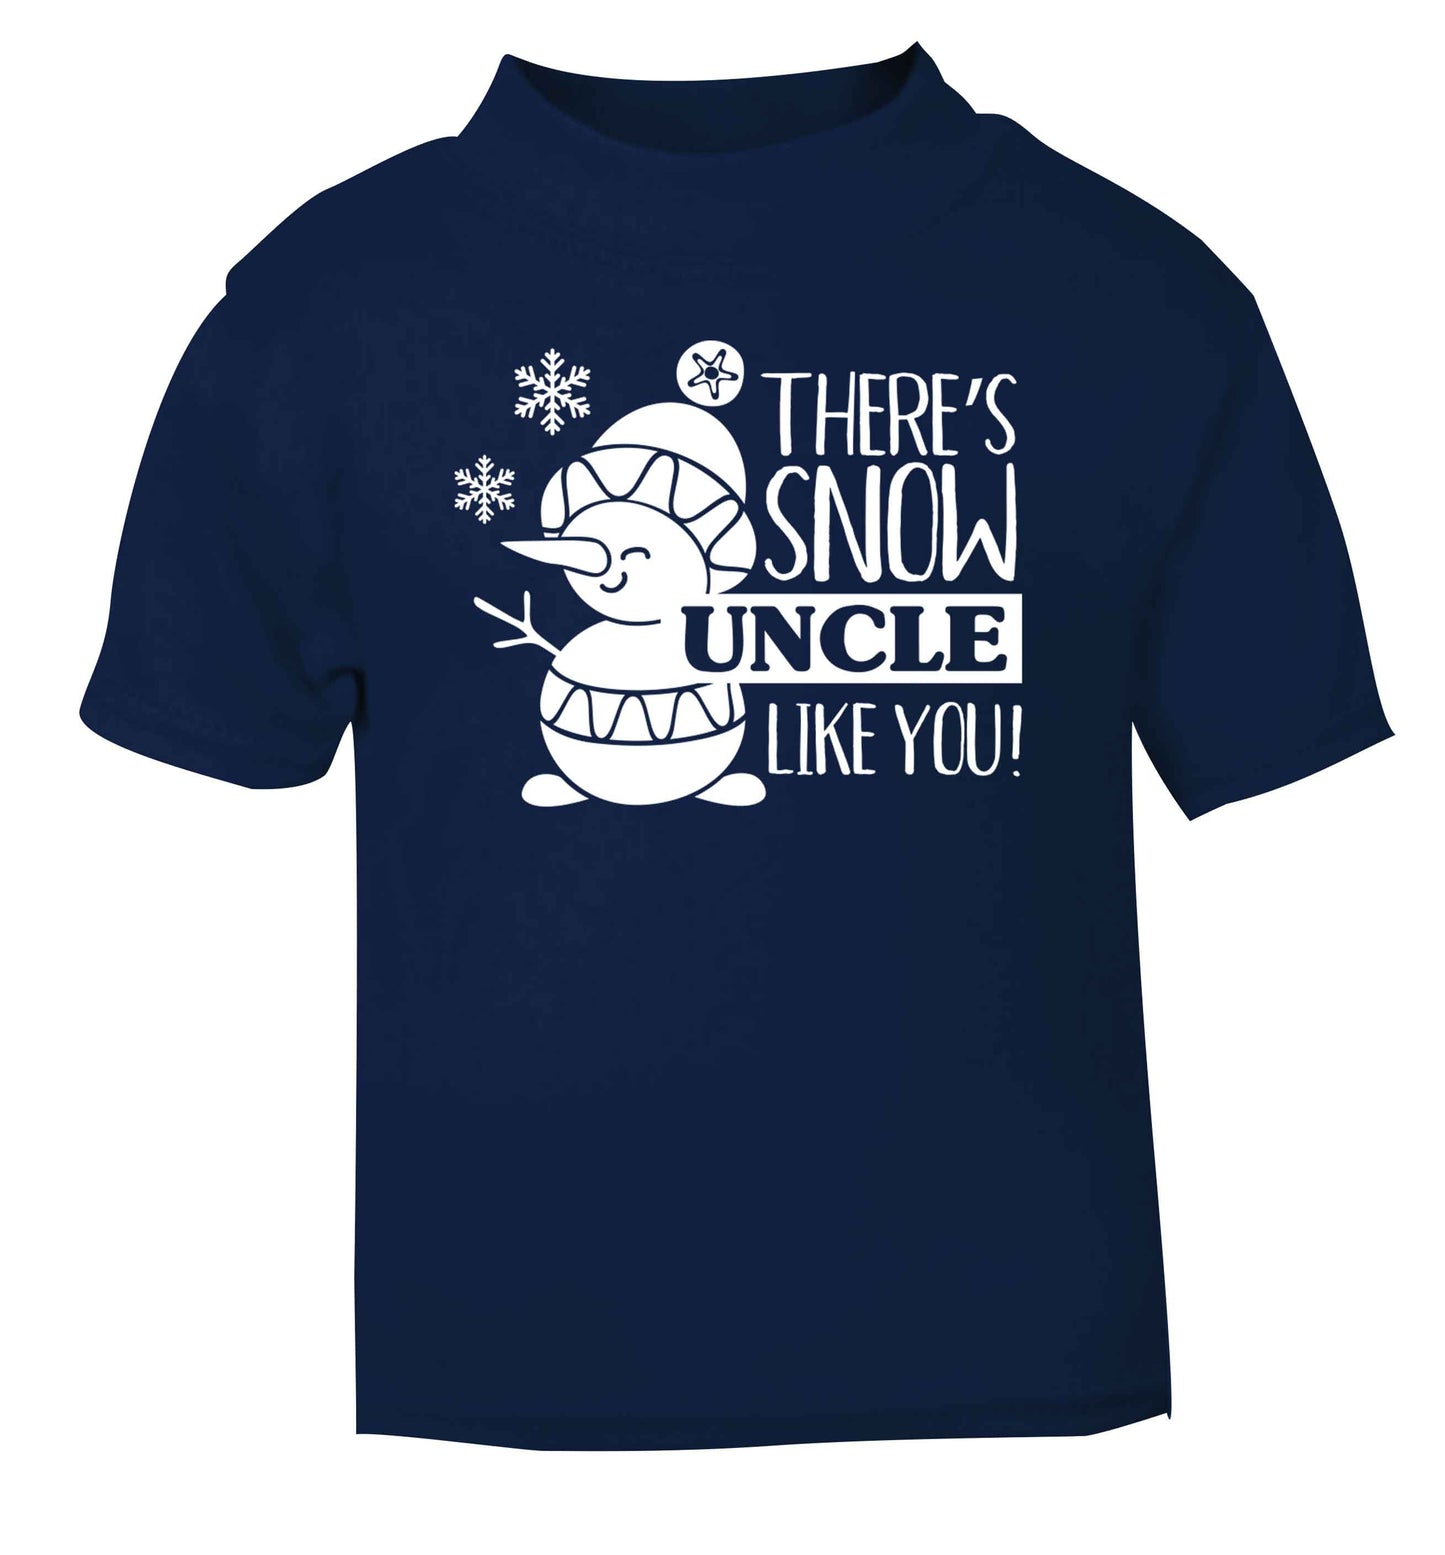 There's snow uncle like you navy baby toddler Tshirt 2 Years